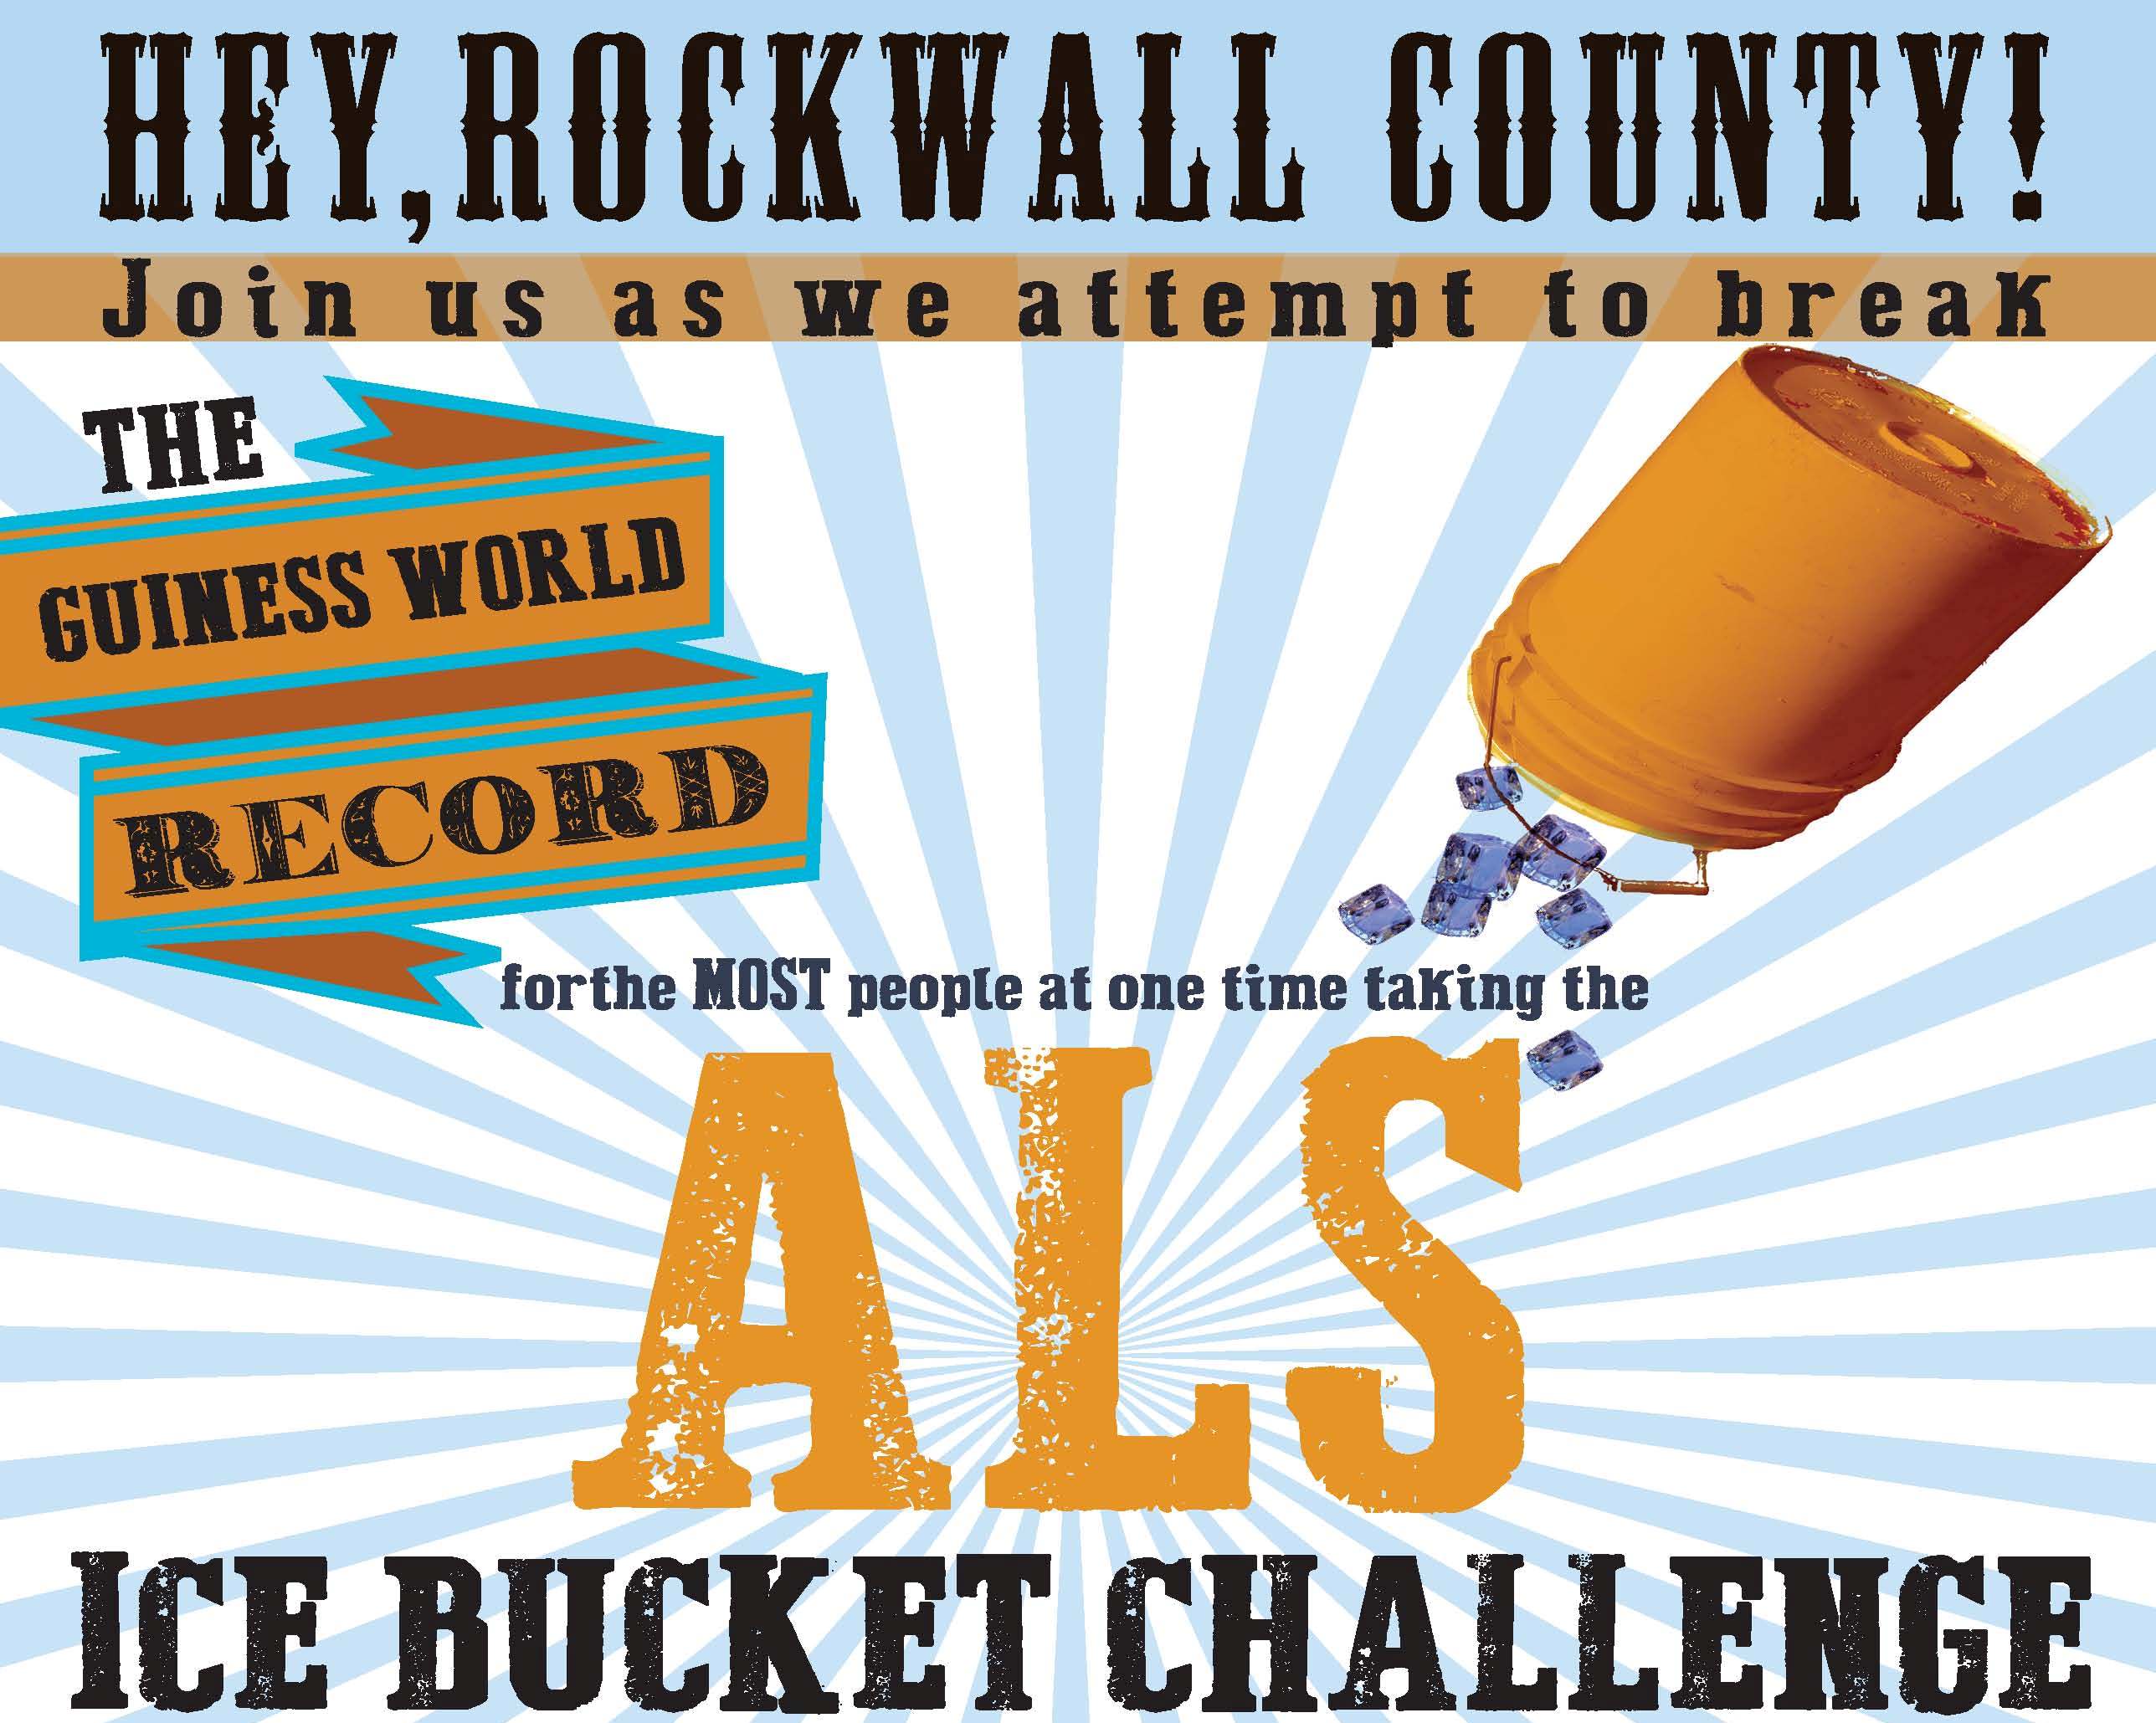 Date, venue changed for world record-setting ice bucket challenge in Rockwall